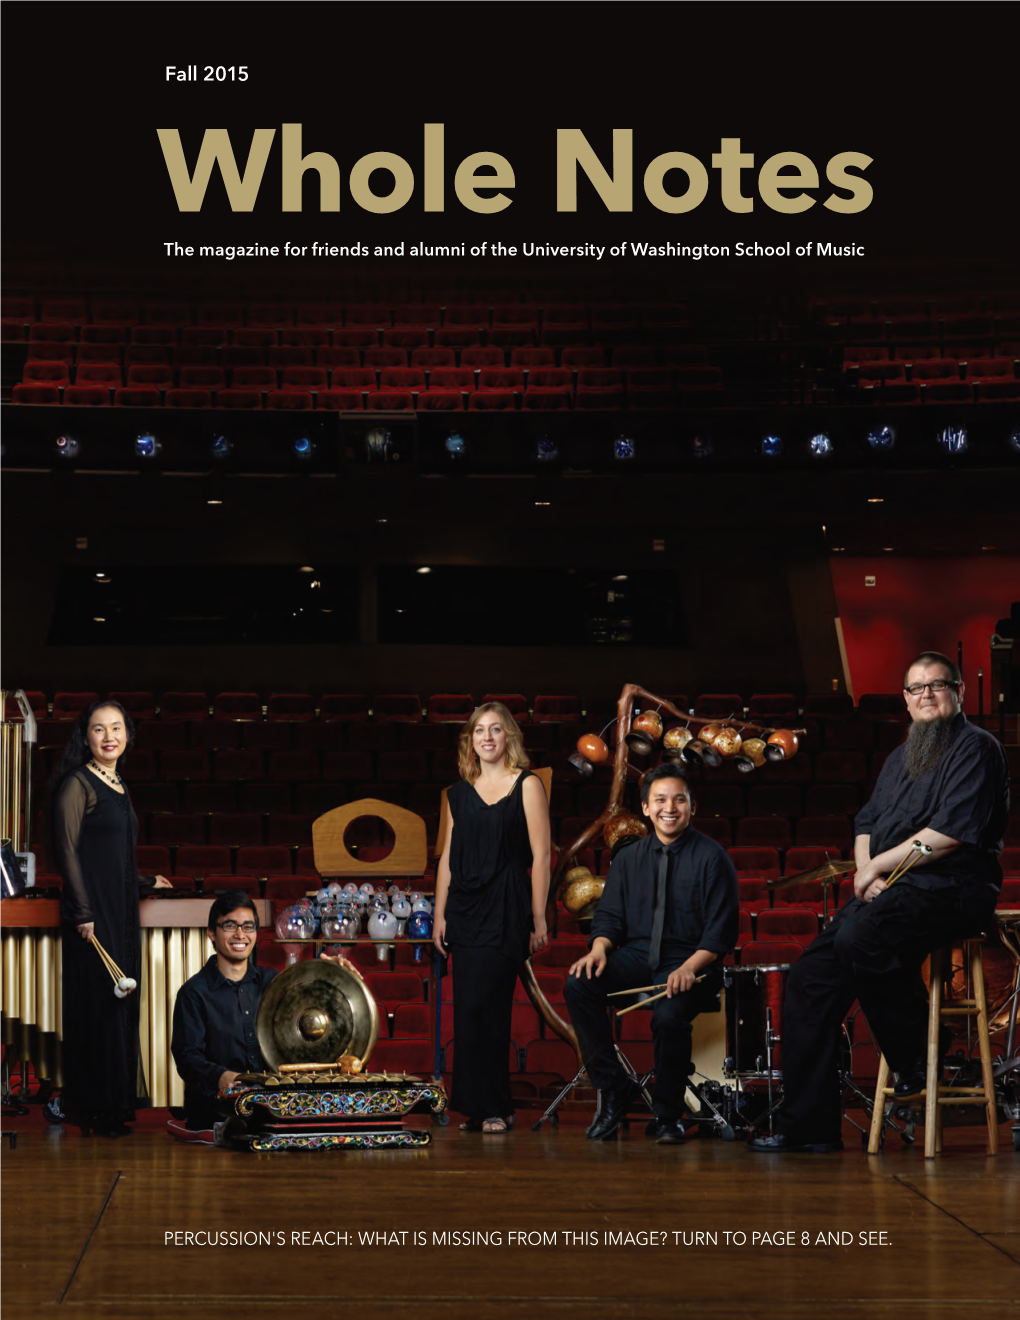 Fall 2015 Whole Notes the Magazine for Friends and Alumni of the University of Washington School of Music